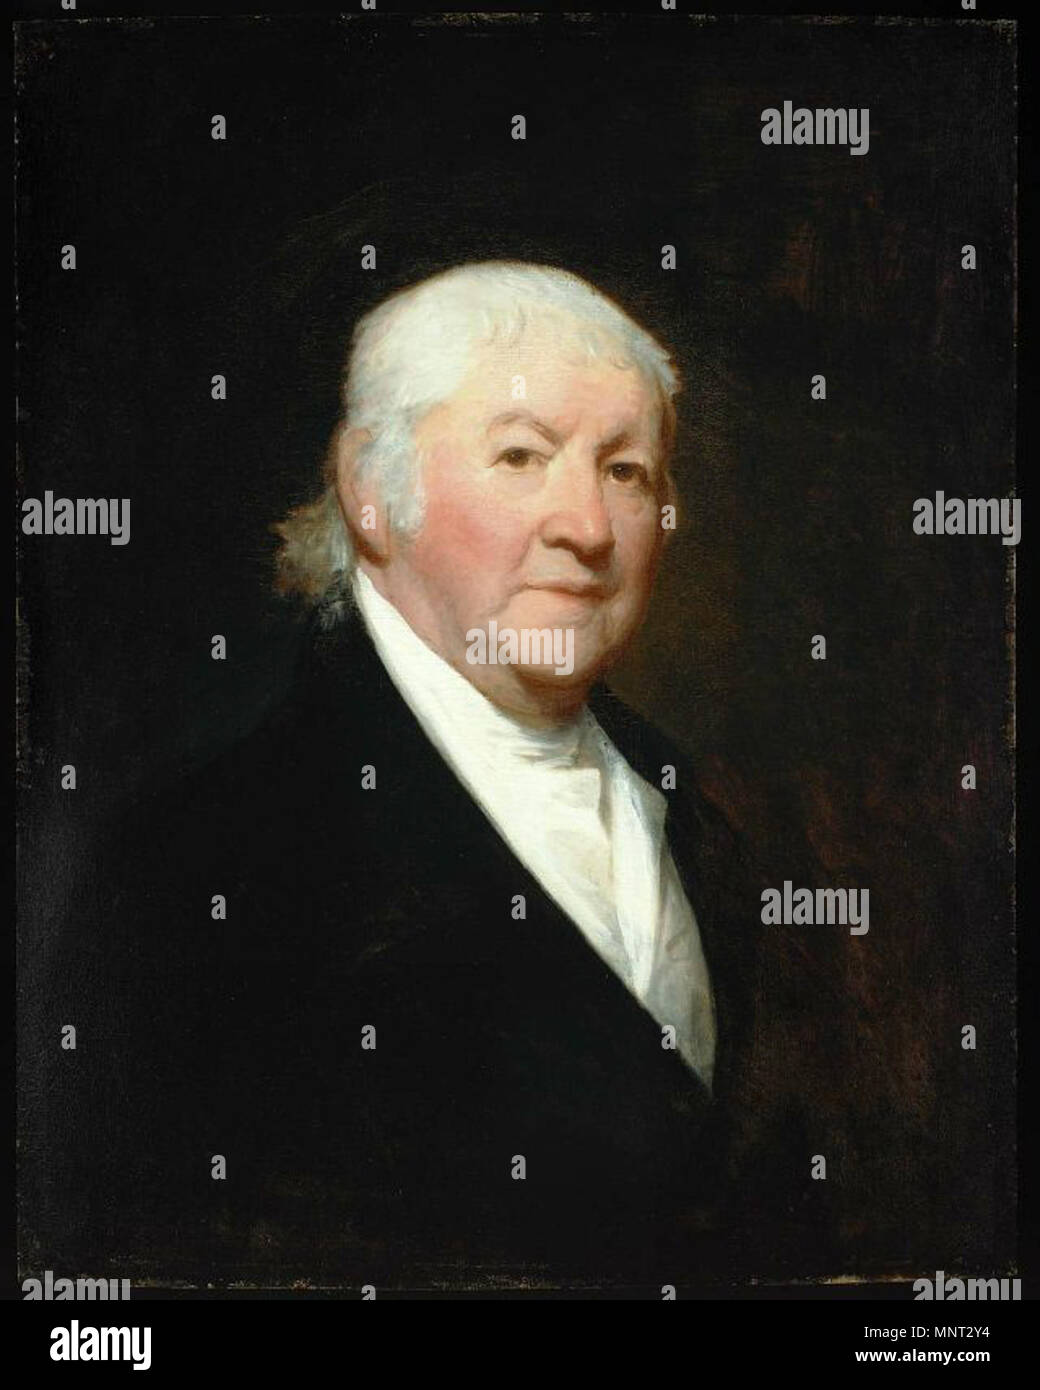 . English: This is an oil on panel painting by Gilbert Stuart of Paul Revere. It was painted in 1813, when Revere was about 78 years old. 1813.   Gilbert Stuart  (1755–1828)      Alternative names Gilbert Charles Stuart ; Birth name: Gilbert Charles Stewart  Description American painter  Date of birth/death 3 December 1755 9 July 1828  Location of birth/death North Kingston (Newport, Rhode Island) Boston  Work location Boston, New York City, London, Dublin  Authority control  : Q41402 VIAF: 61689381 ISNI: 0000 0000 6634 9660 ULAN: 500010392 LCCN: n50083265 NLA: 35149085 WorldCat 967 PaulRevere Stock Photo